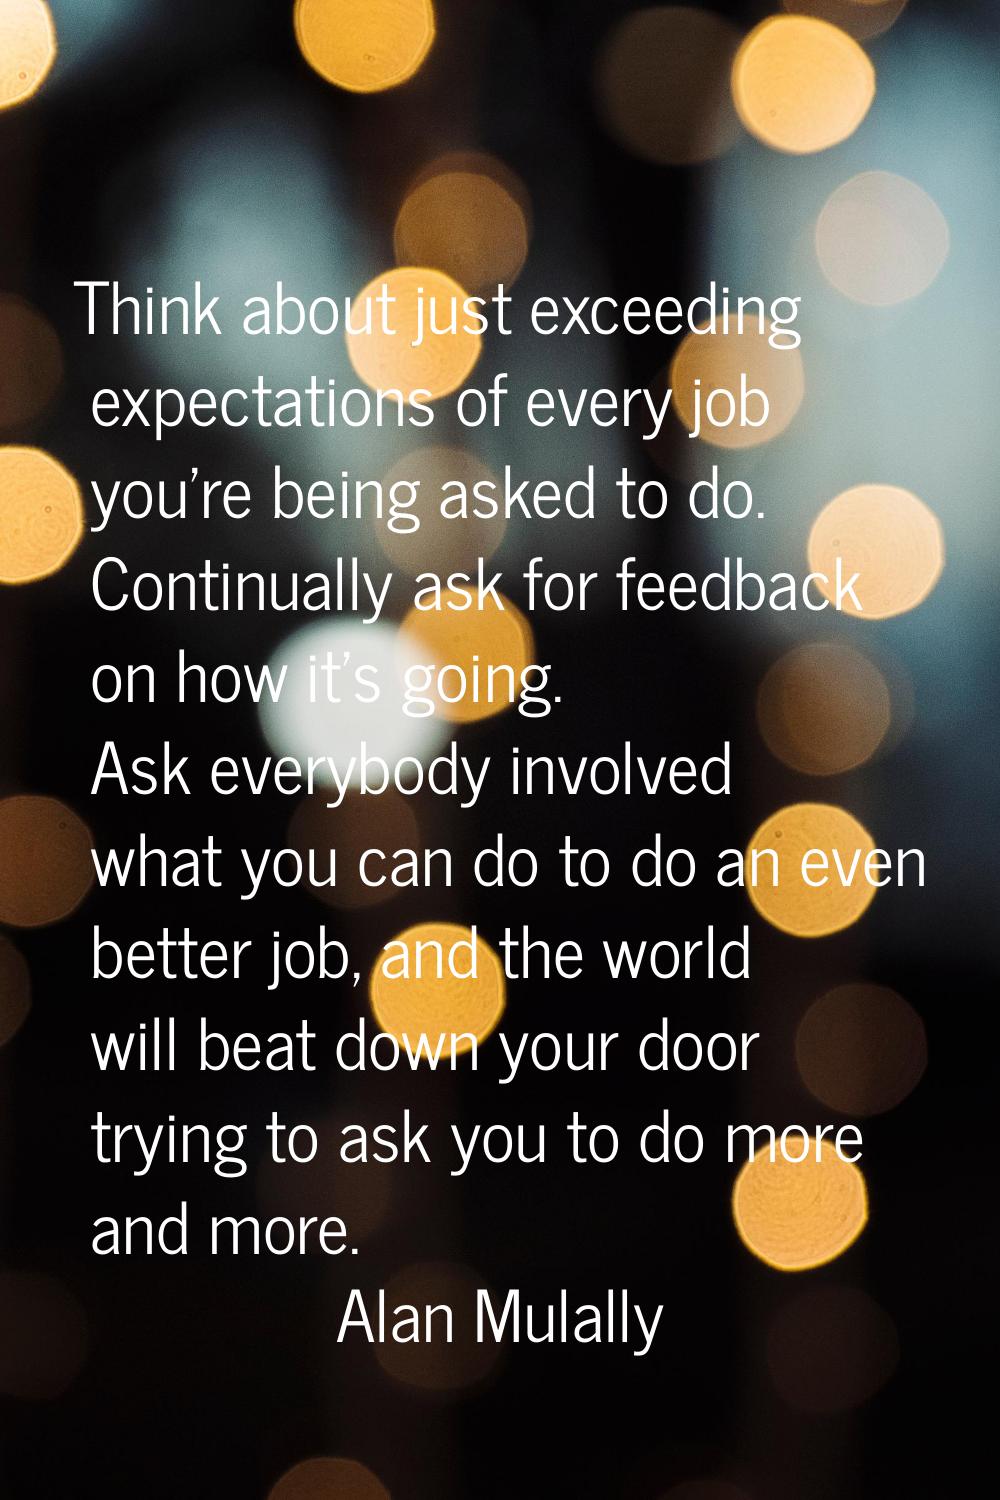 Think about just exceeding expectations of every job you're being asked to do. Continually ask for 